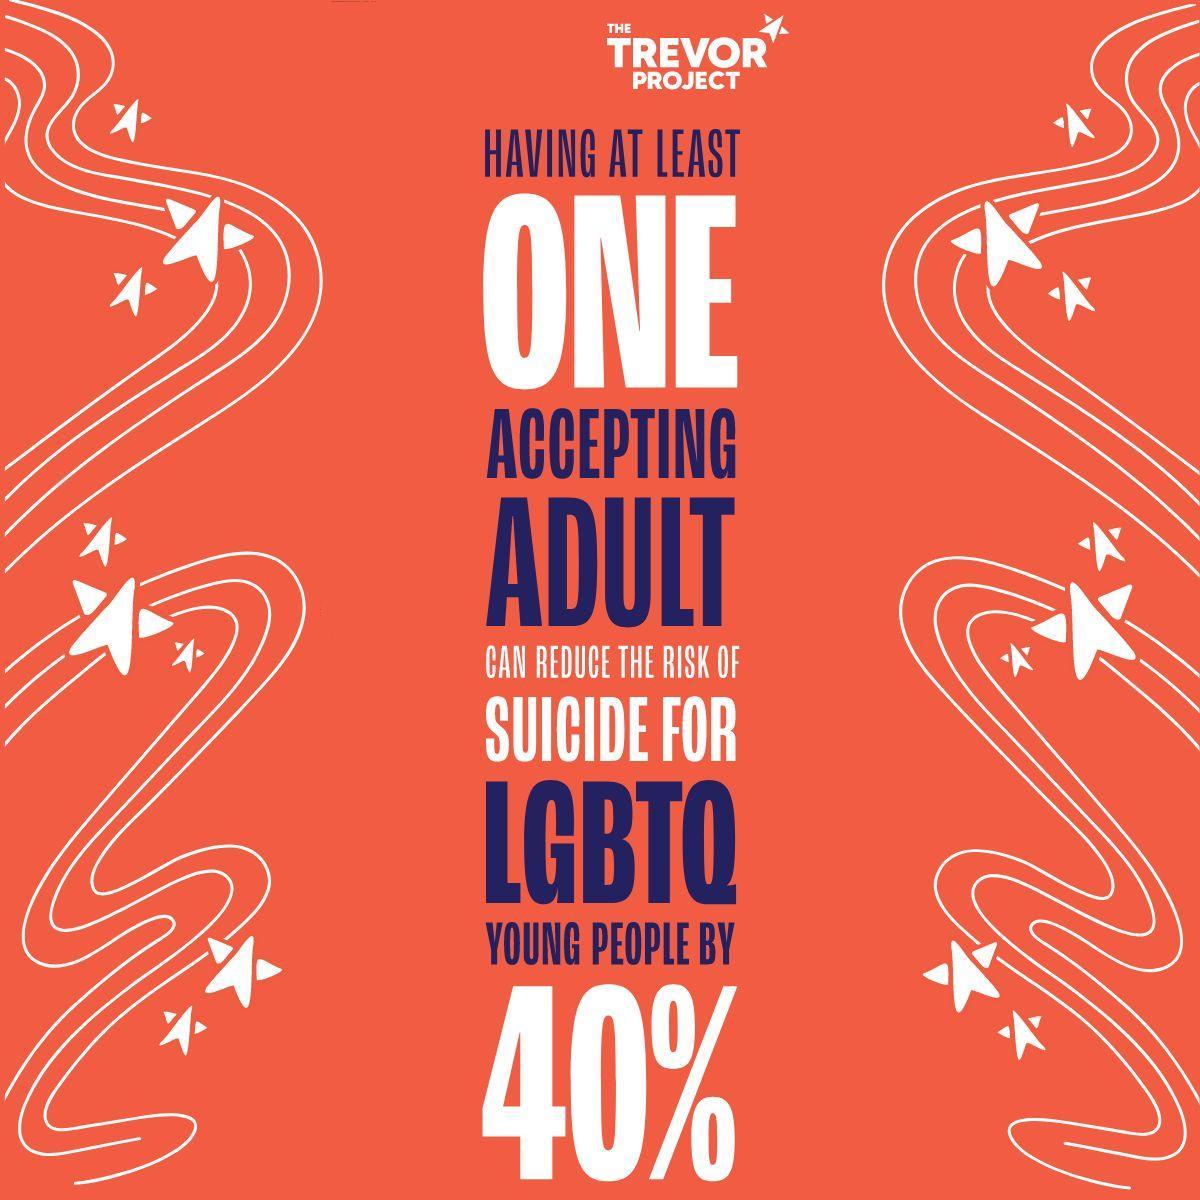 Orange graphic stating "Having at least one accepting adult can reduce the risk of suicide for LGBTQ young people by 40%"